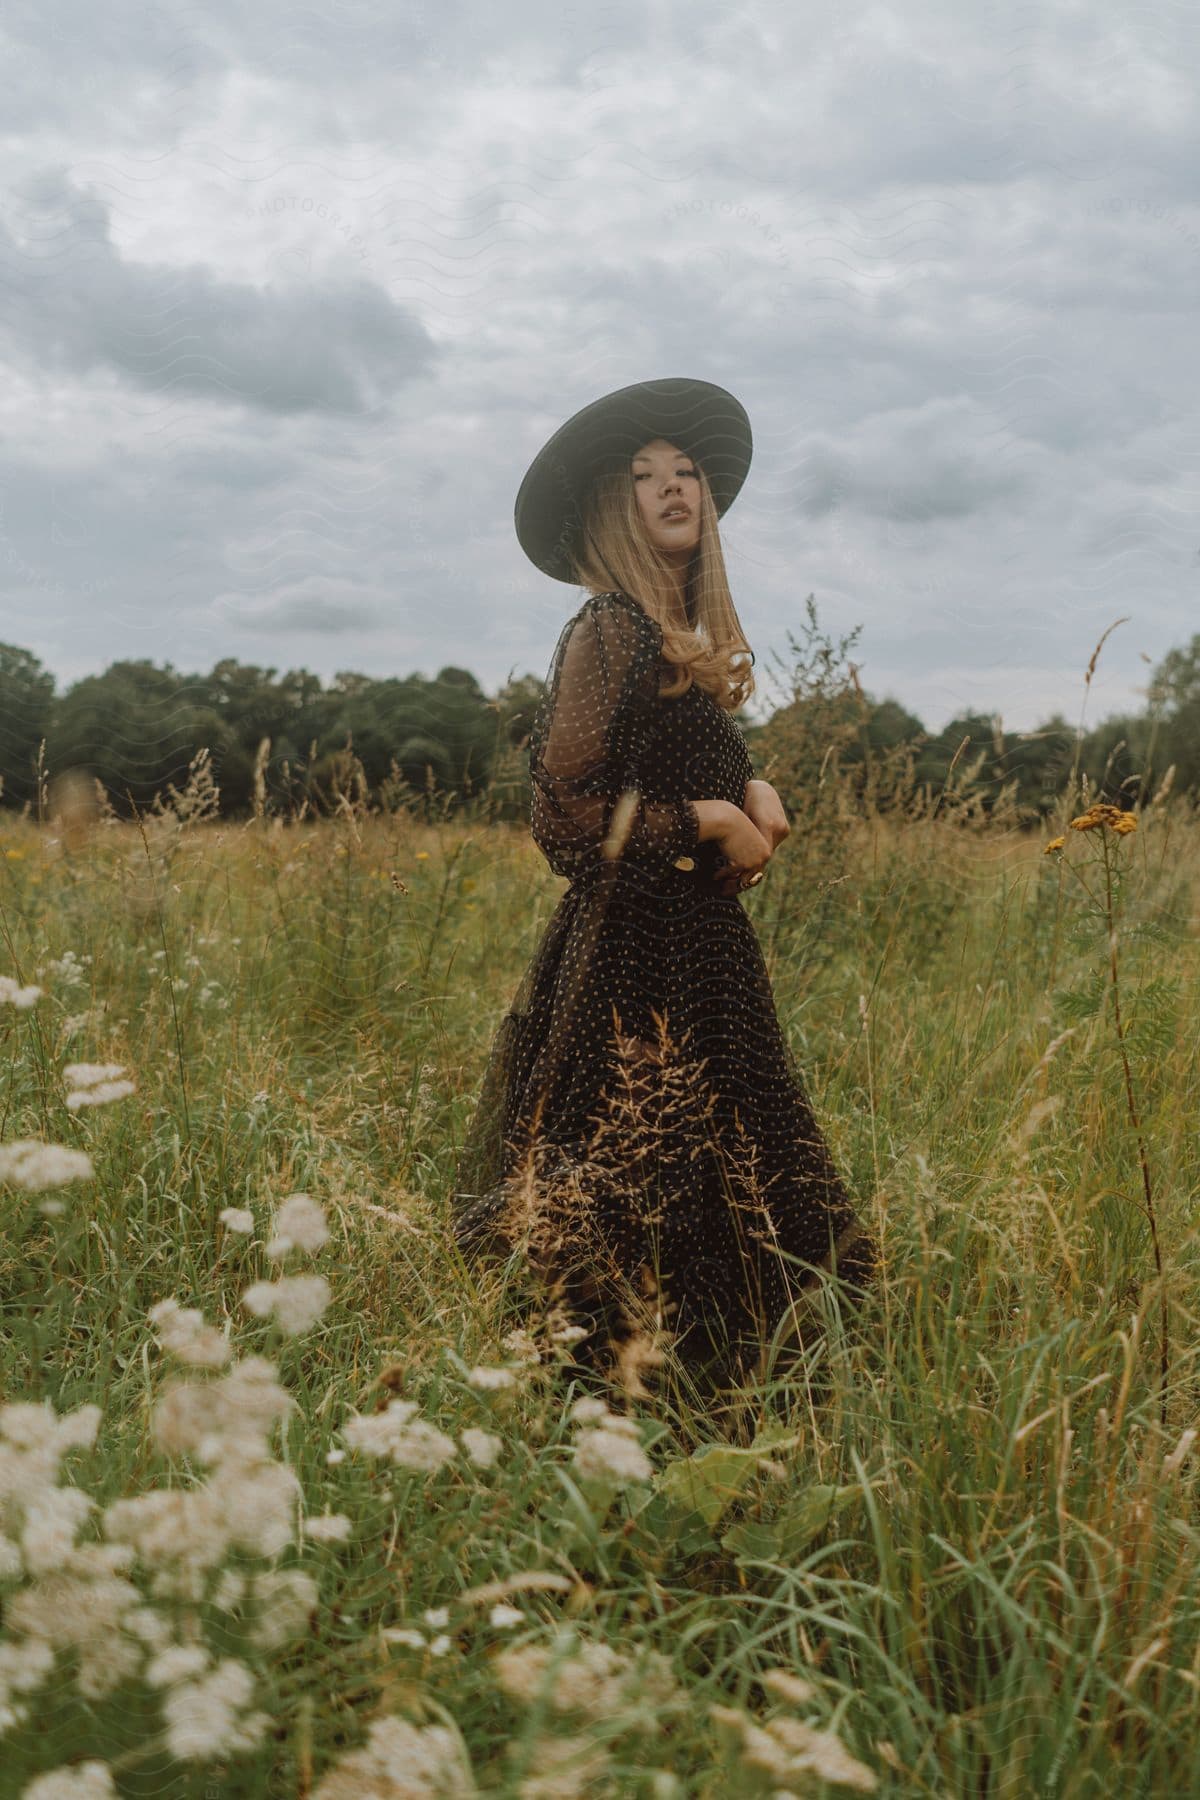 A woman in a black polka dot dress and hat stands on a grassy field with blooming flowers in the foreground on a cloudy day, her shoulder-length blonde hair curling up at the ends.